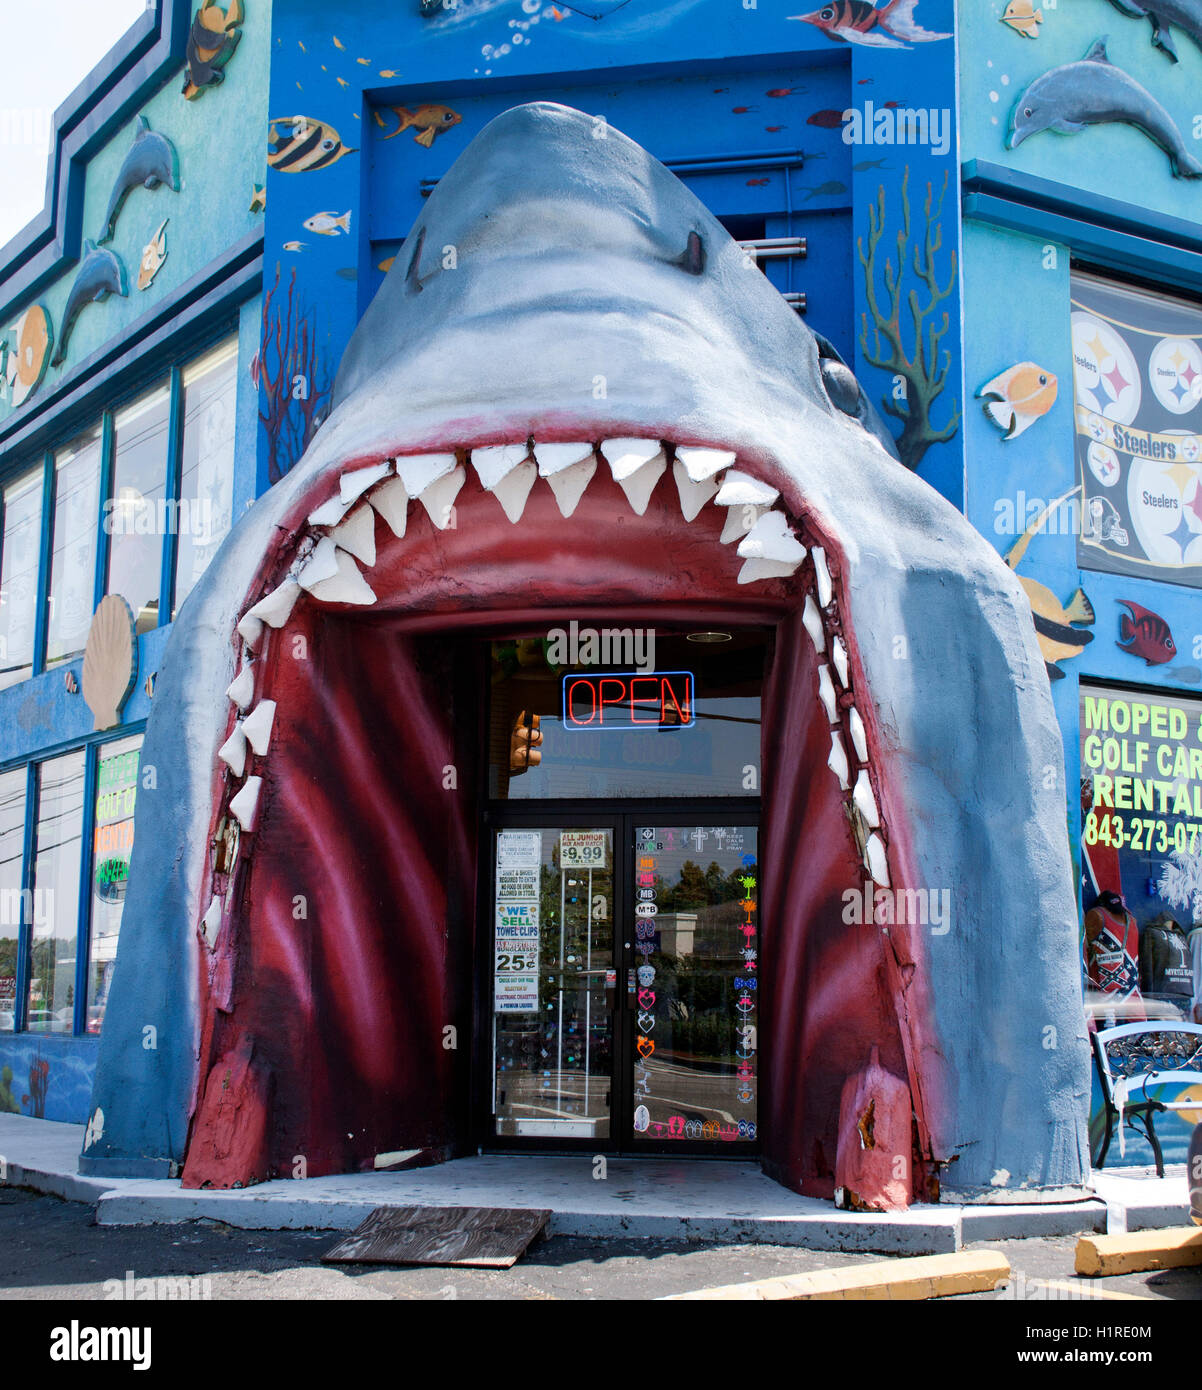 Giant Shark entrance at a store in Myrtle Beach South Carolina Stock Photo  - Alamy